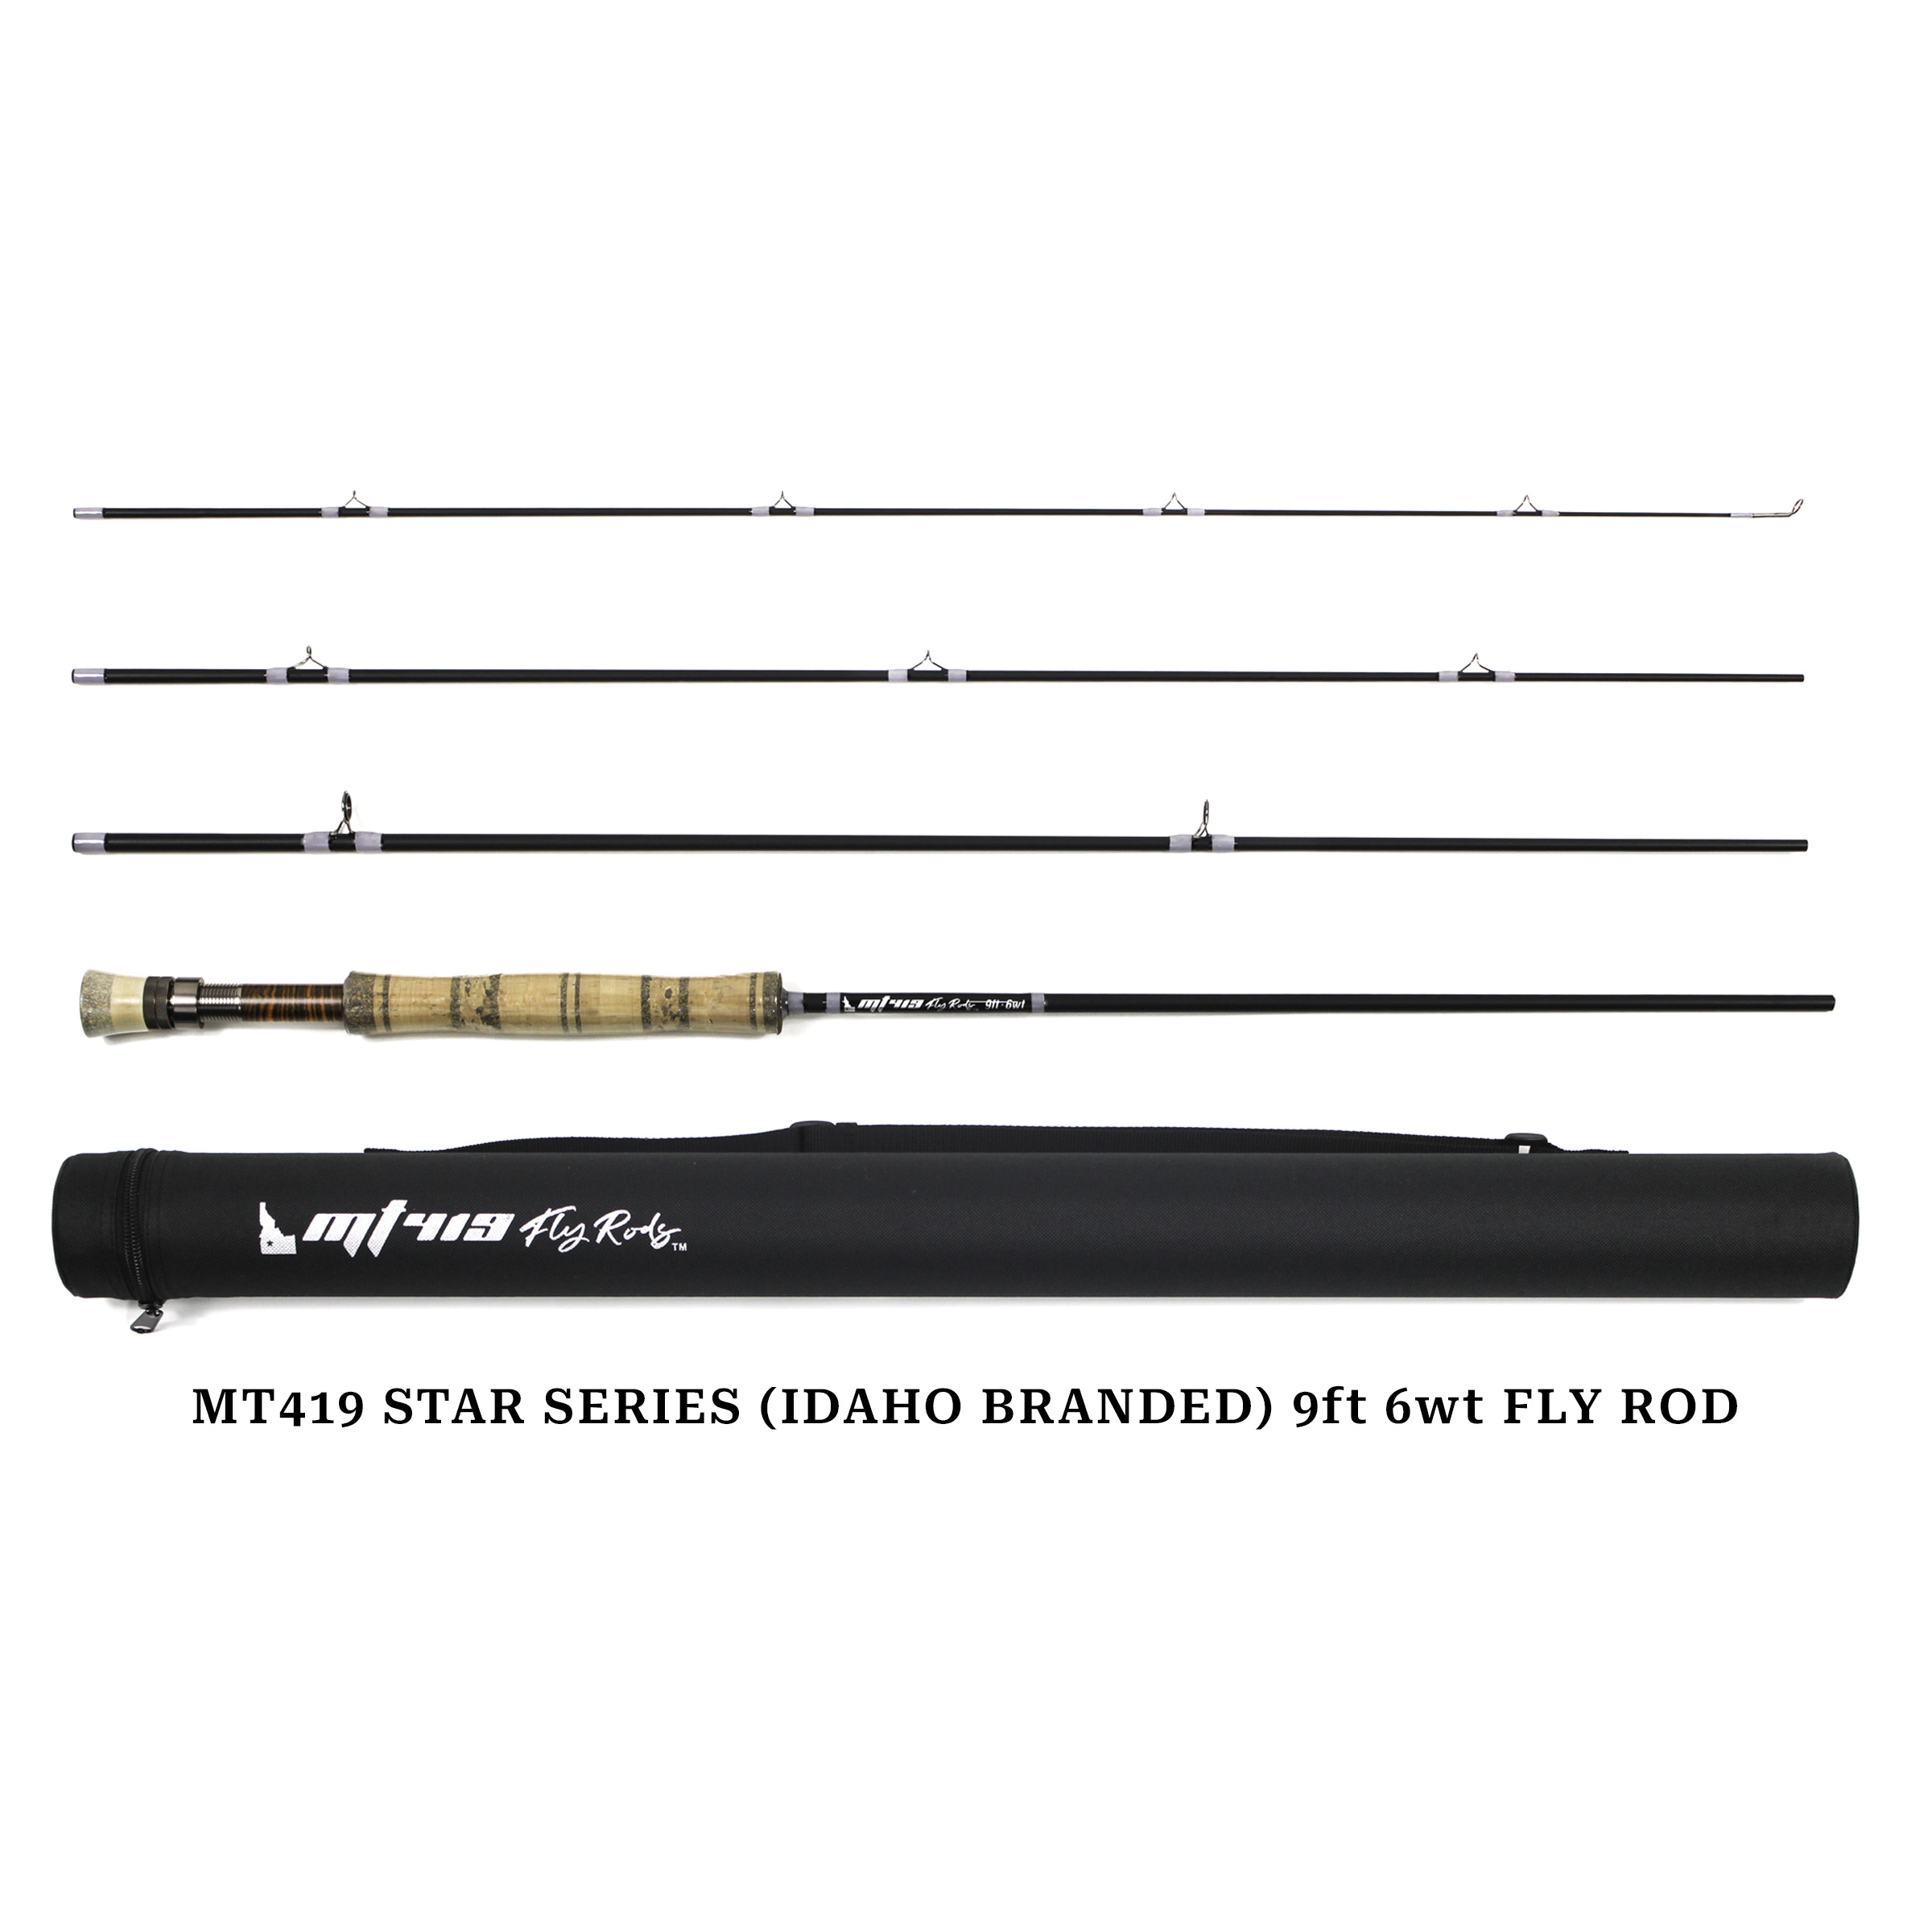 Star Series - MT419 FLY RODS